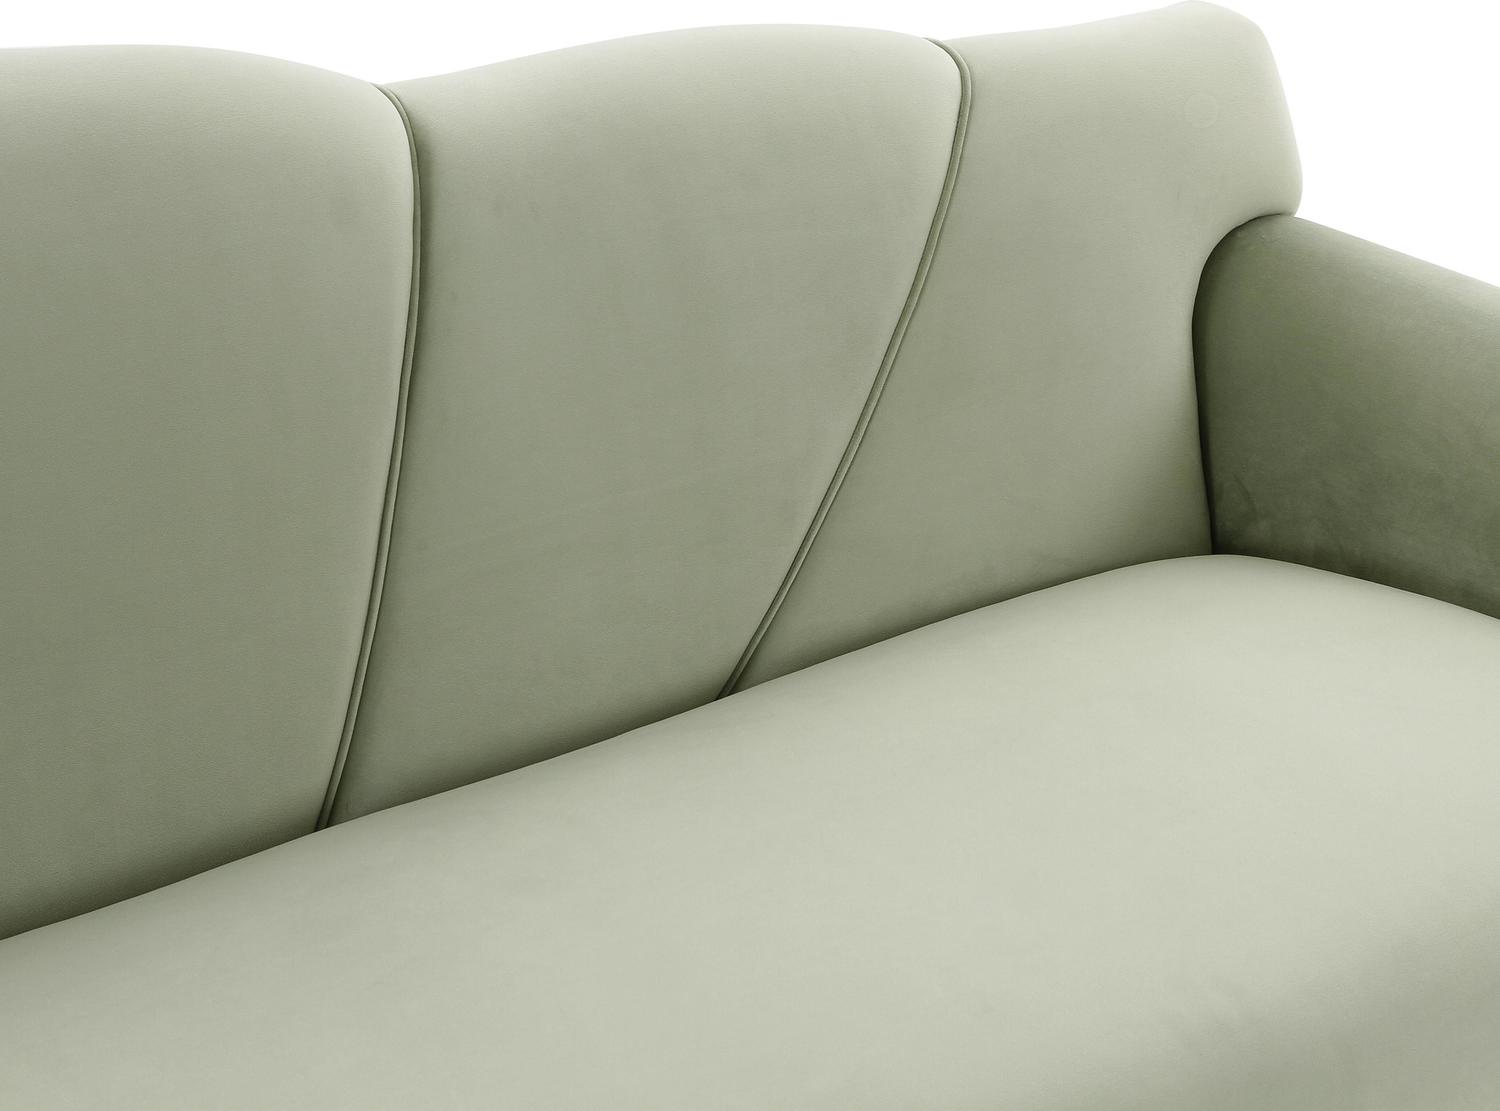 gray leather couches for sale Tov Furniture Sofas Moss Green